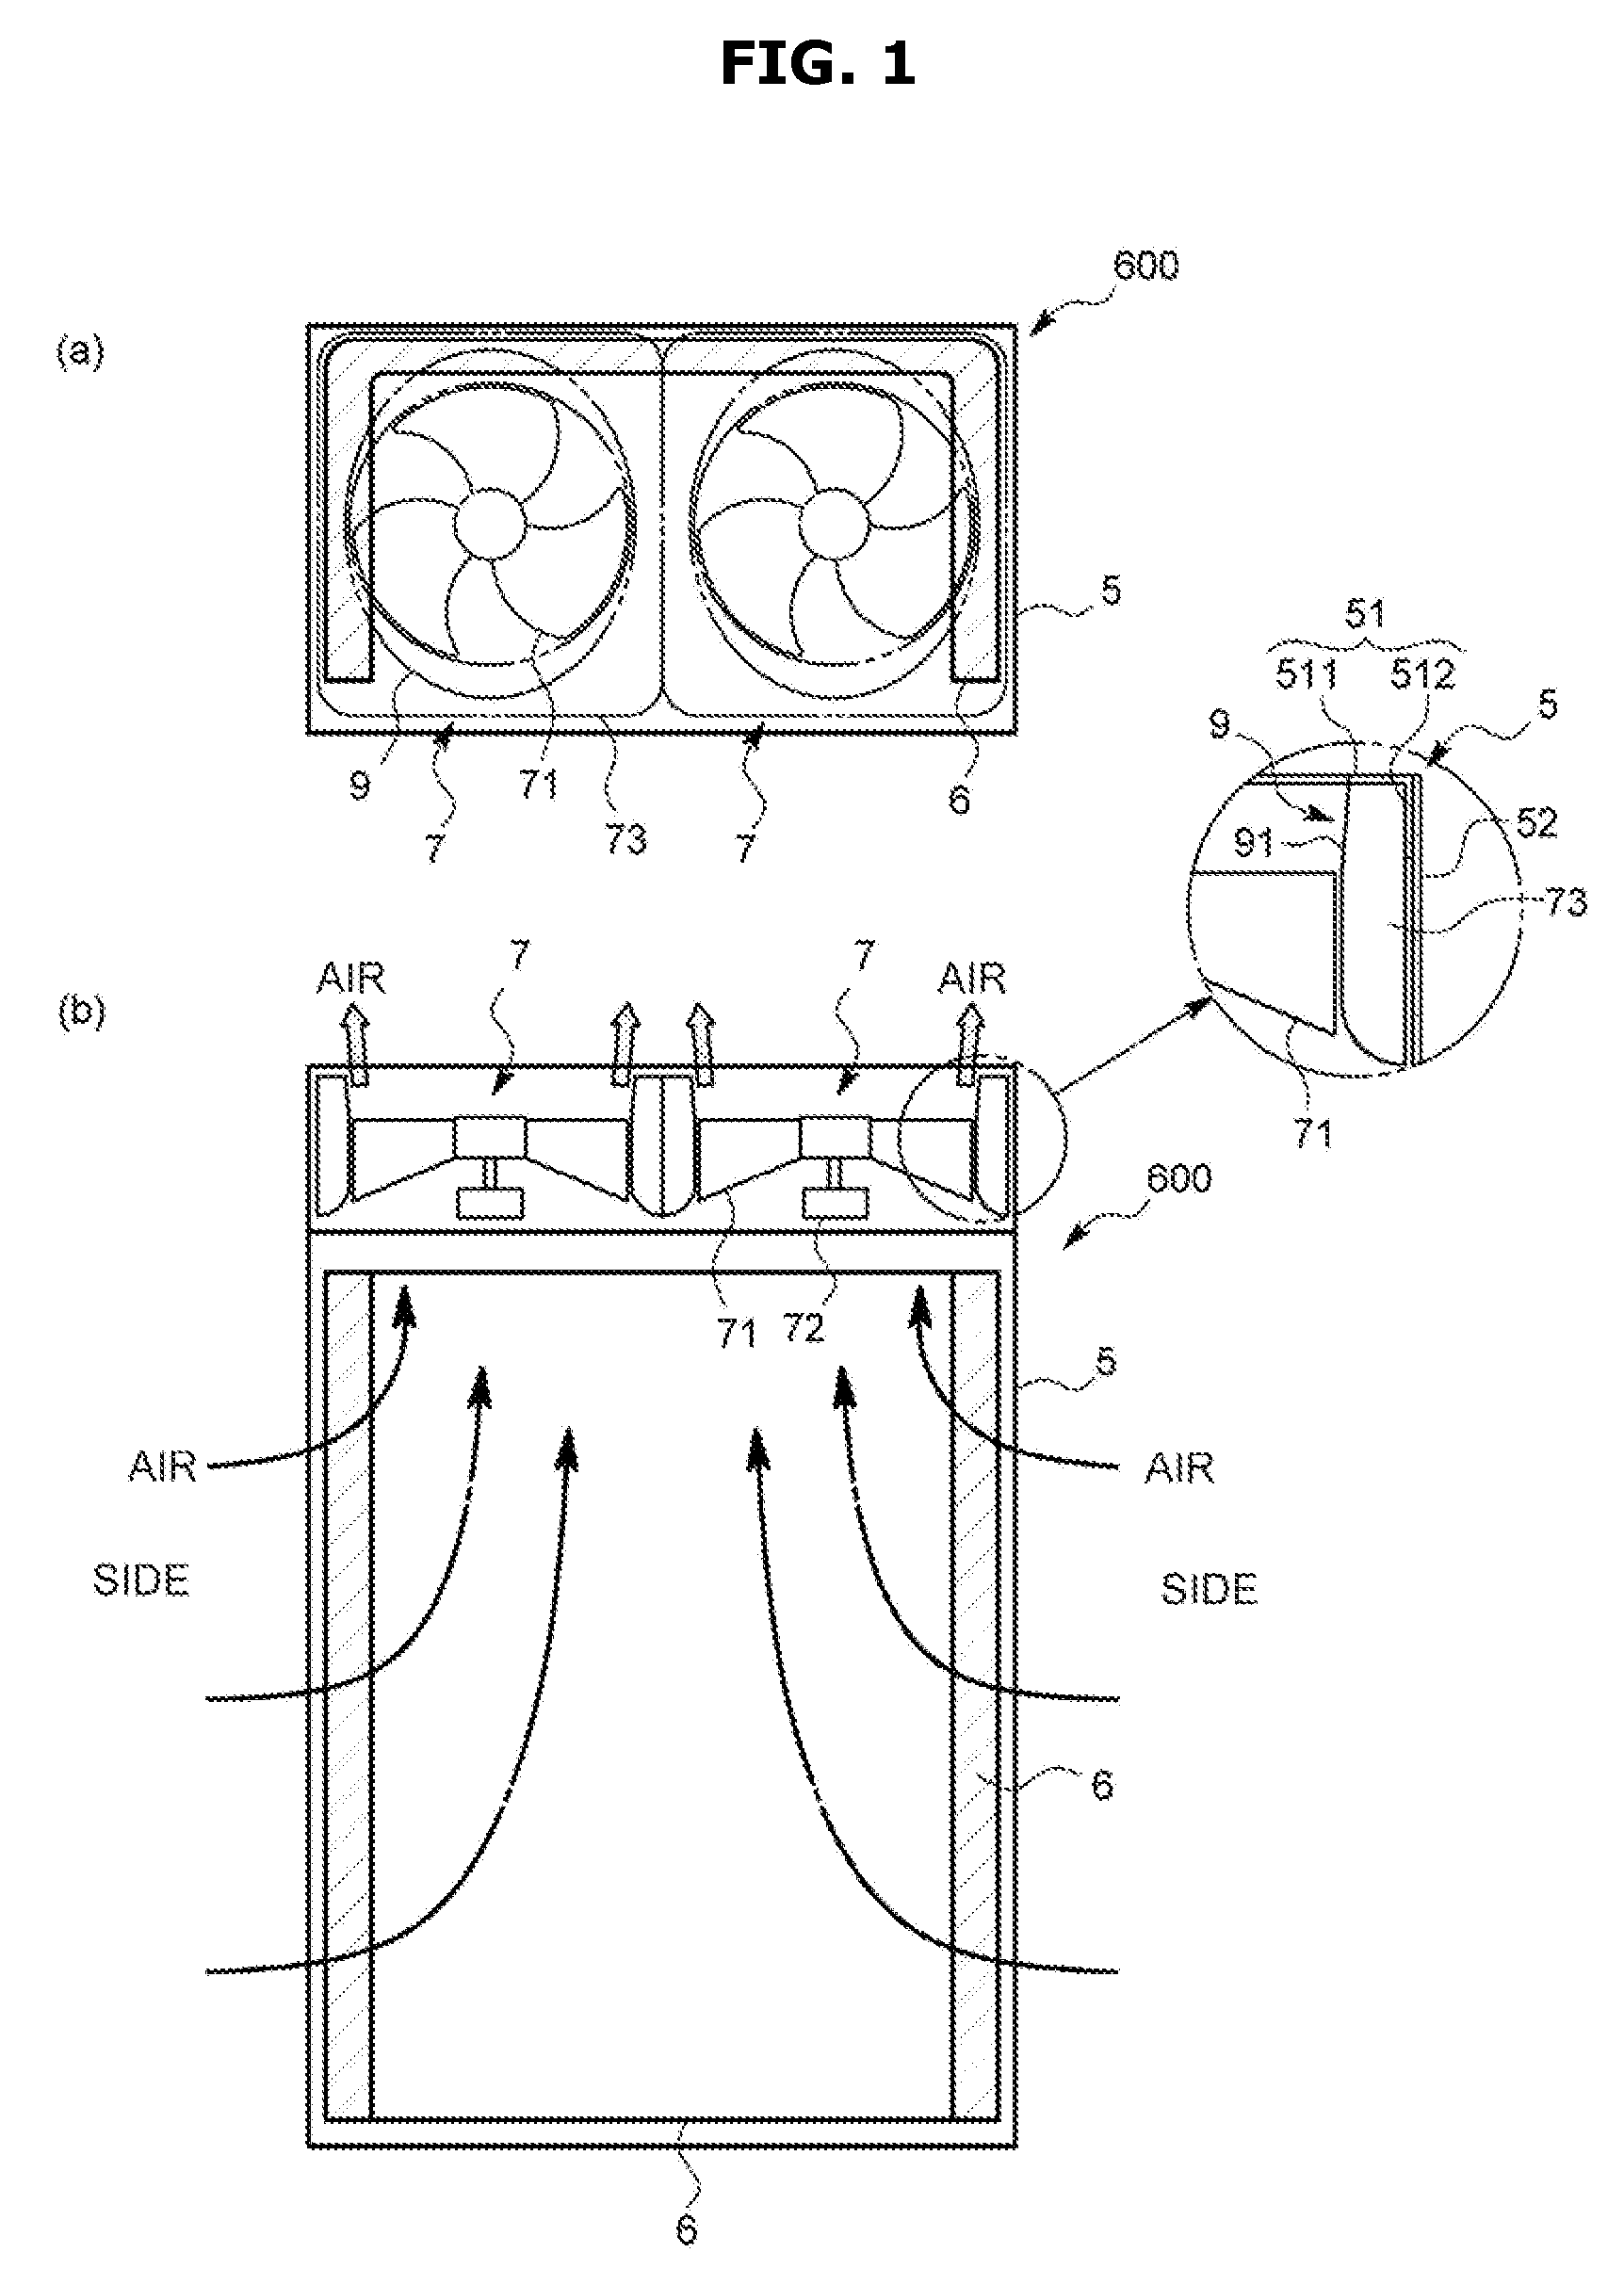 Blower and outdoor unit of air conditioner comprising same